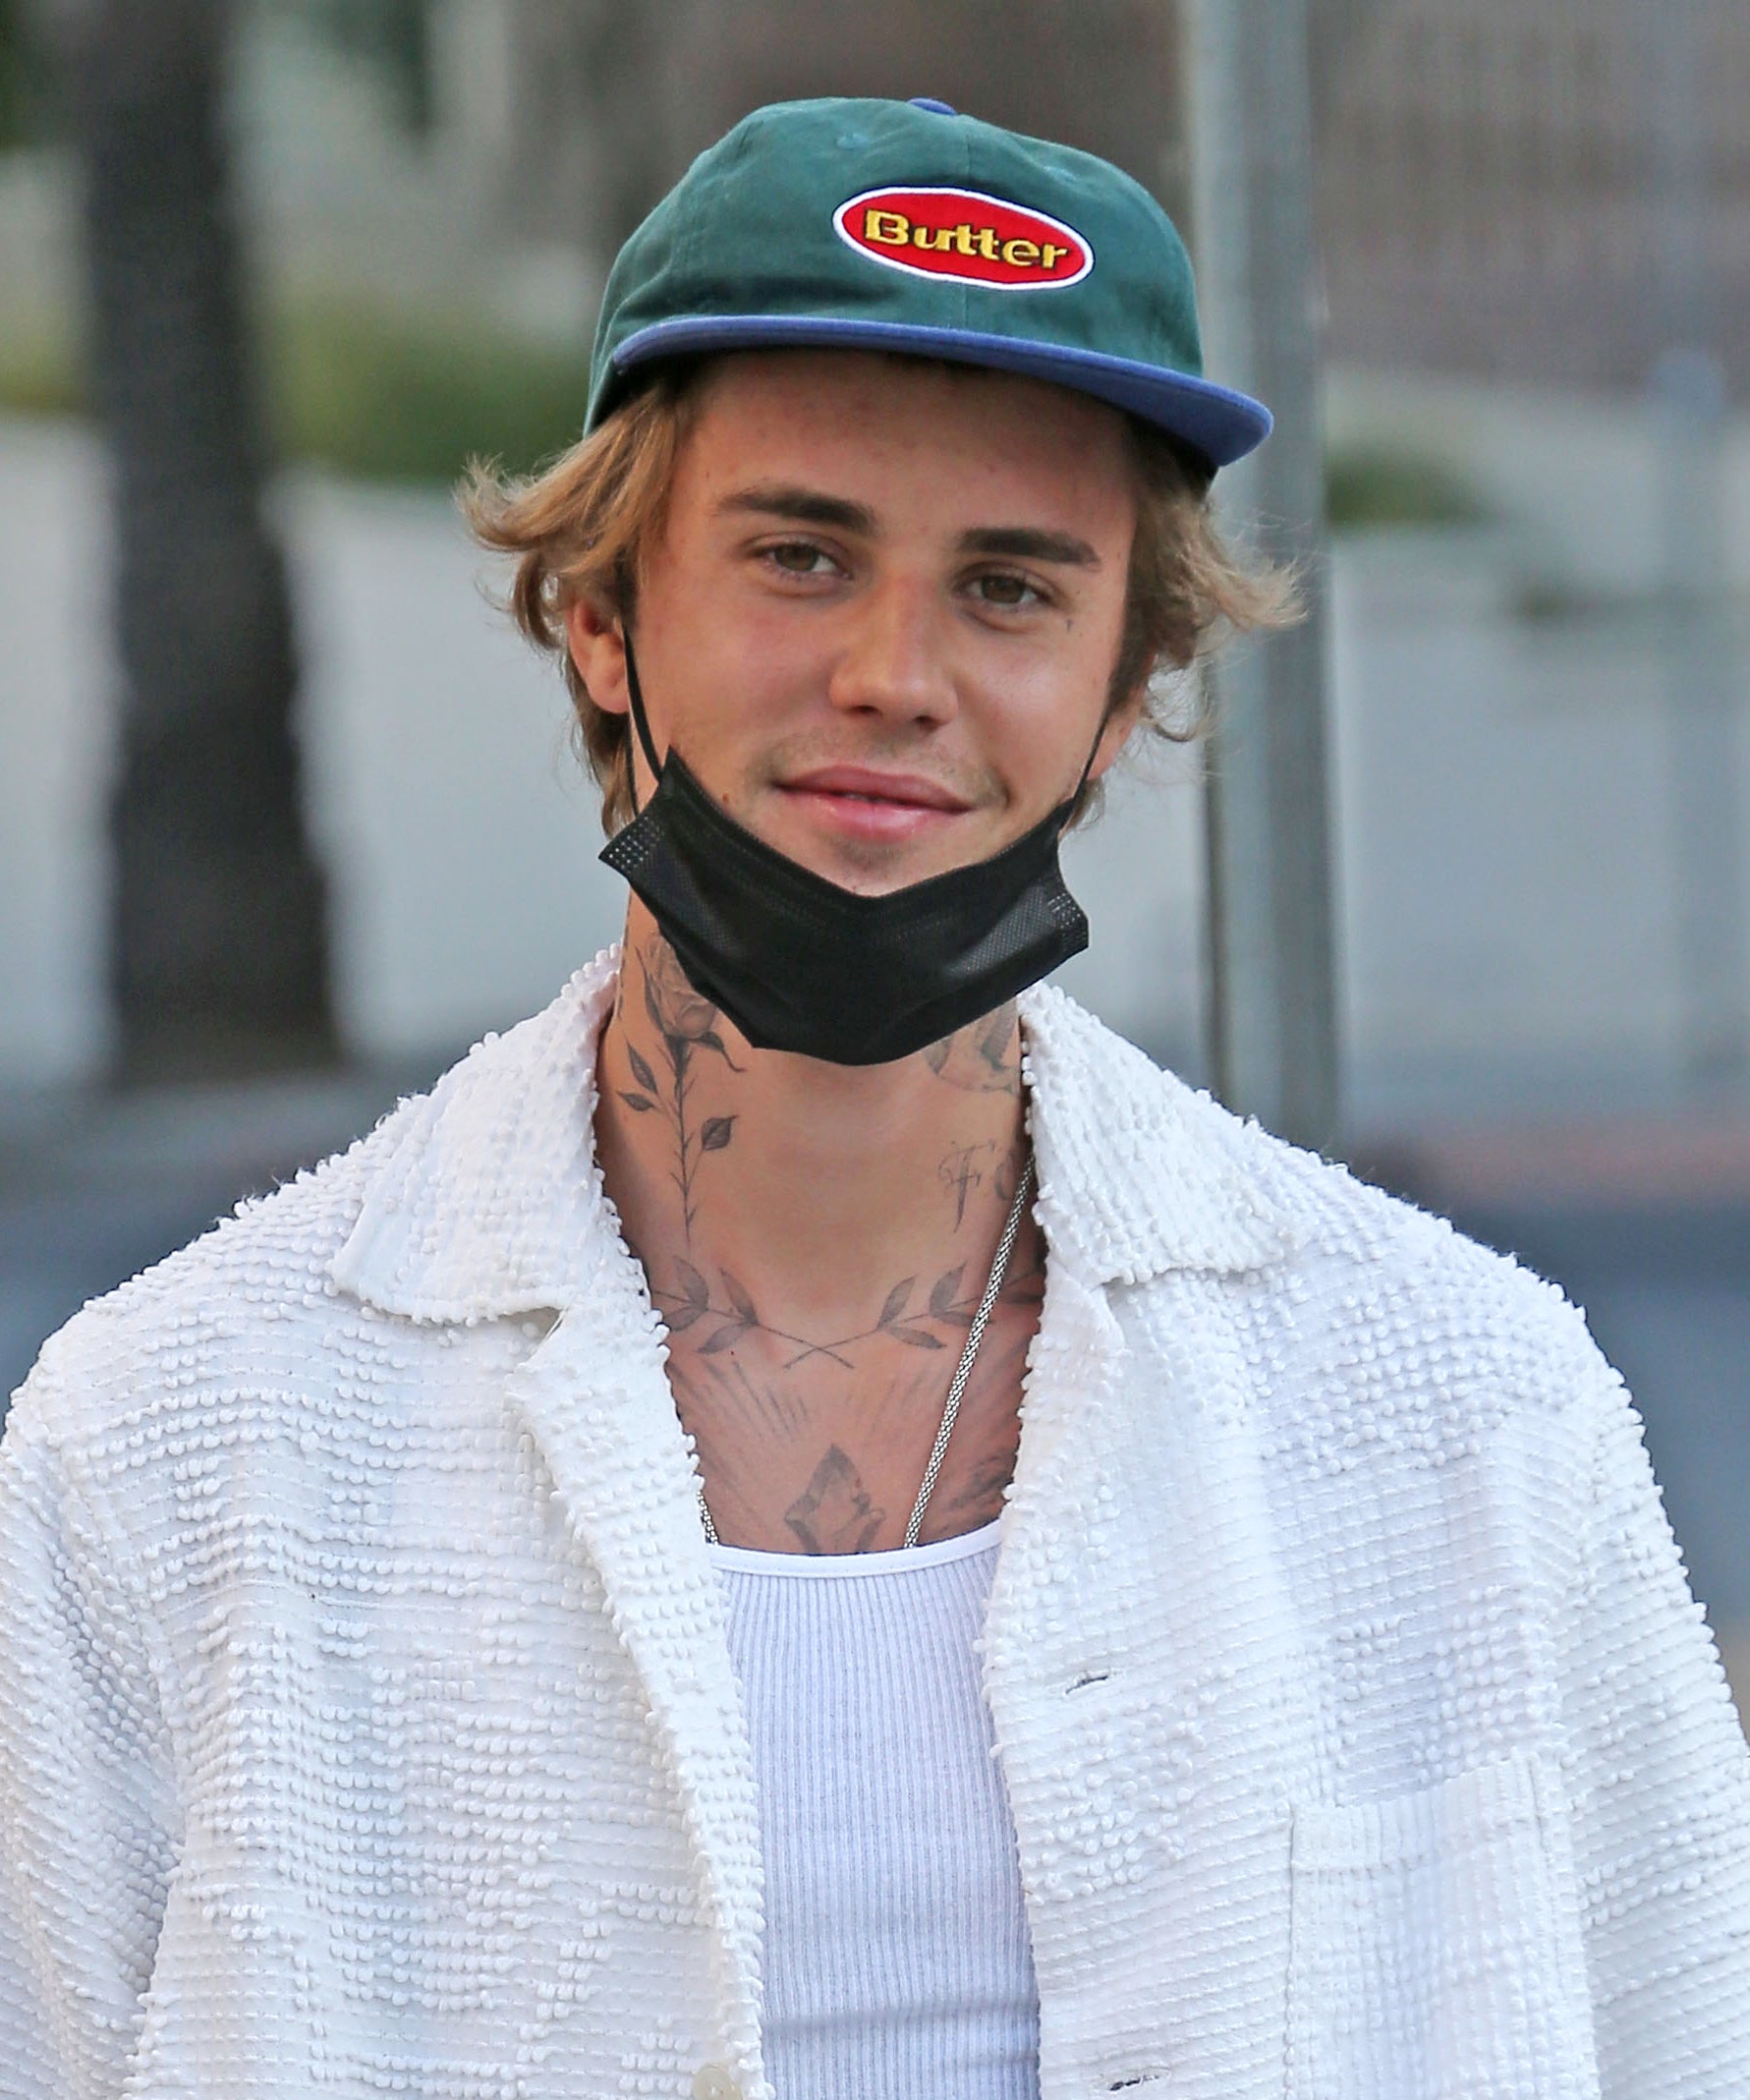 Justin Bieber Just Shaved His Hair With Summer Buzz Cut